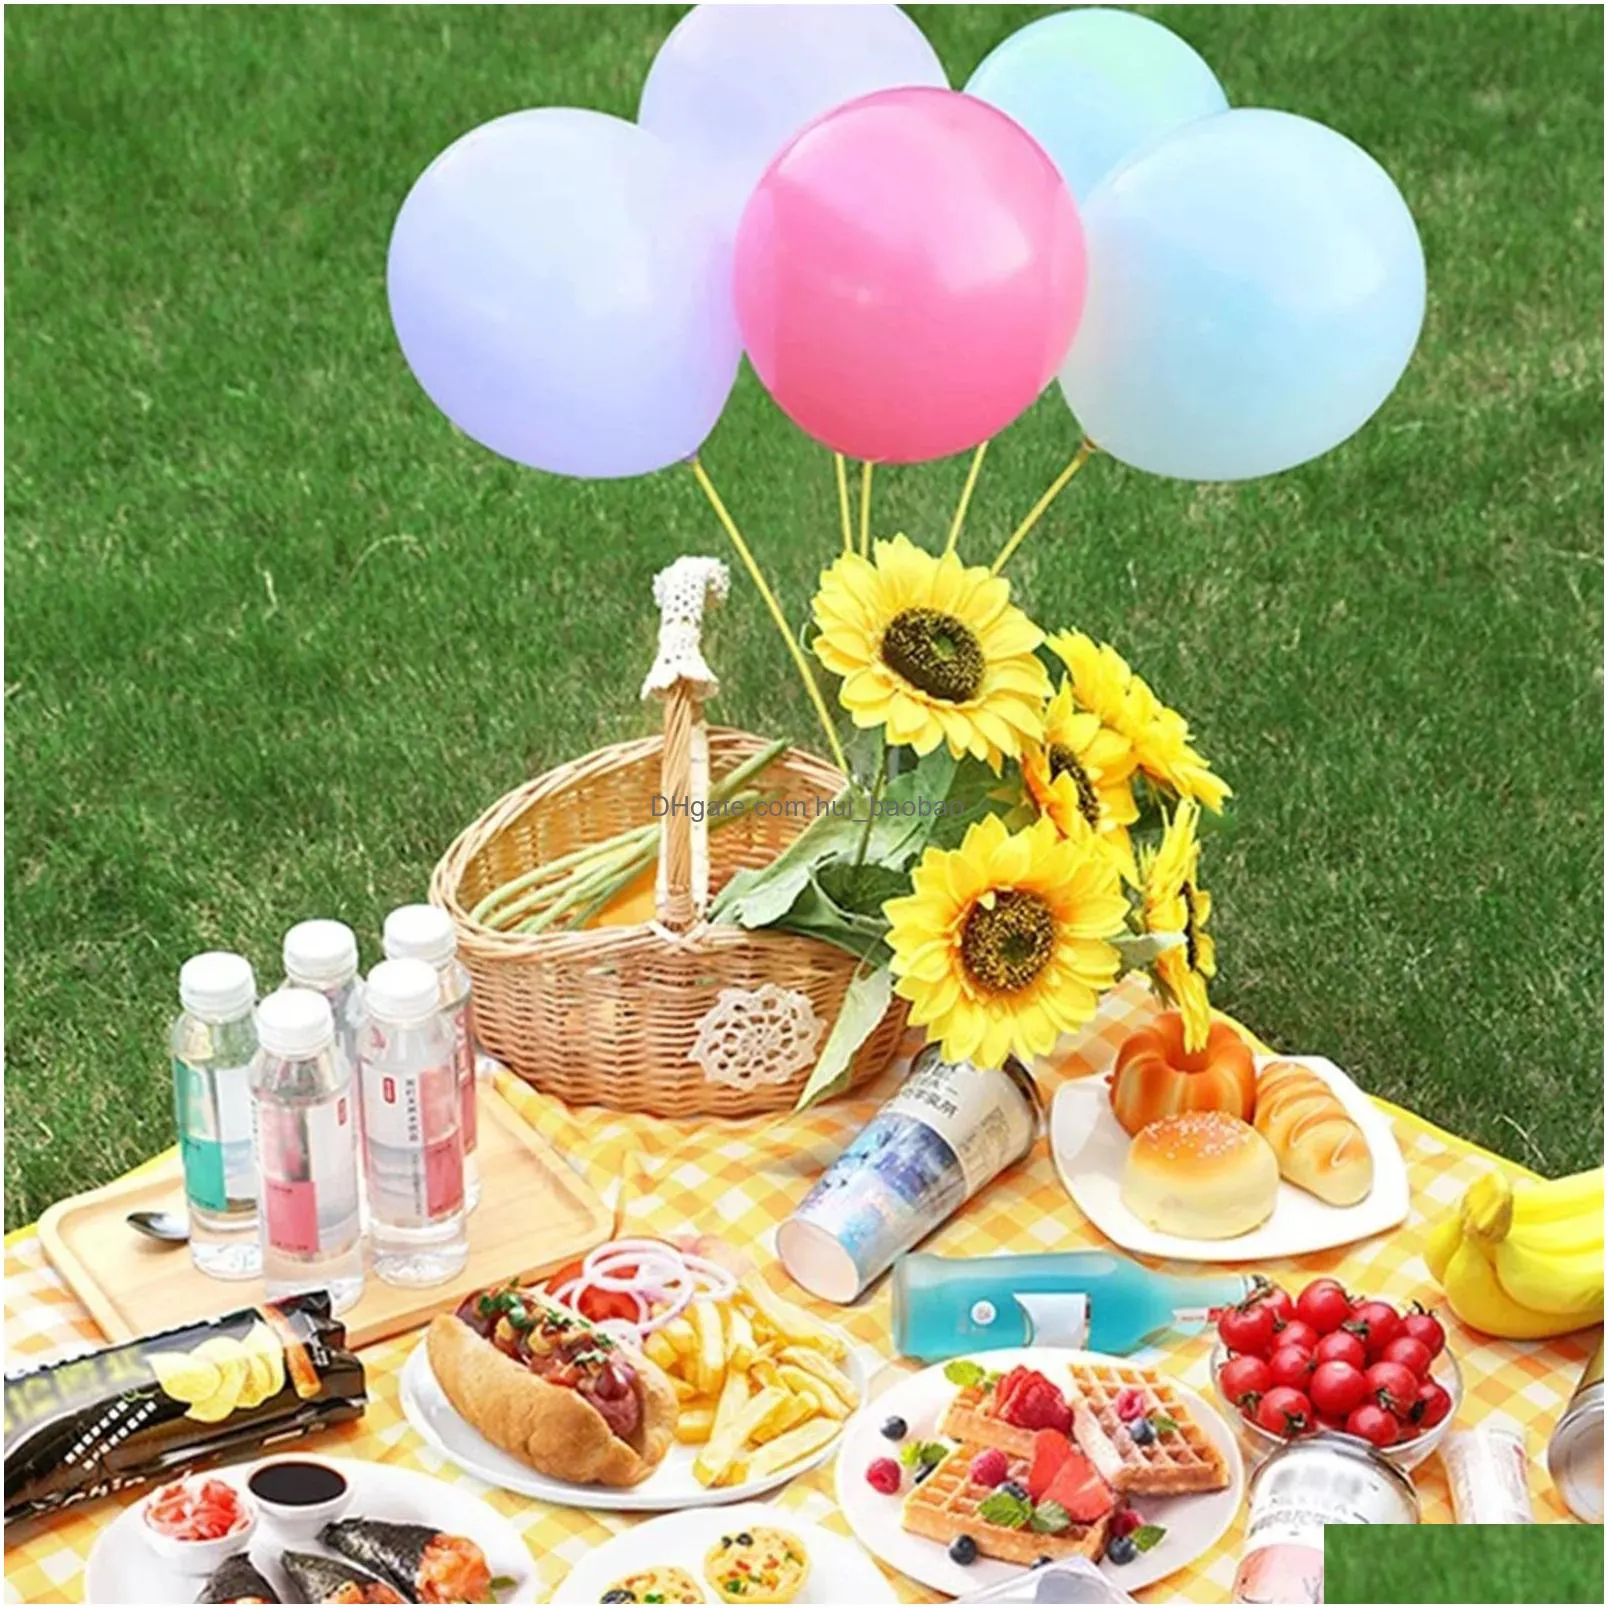 outdoor pads mat 200x150cm large picnic blanket foldable portable thicken waterproof beach cam slee drop delivery sports outdoors camp